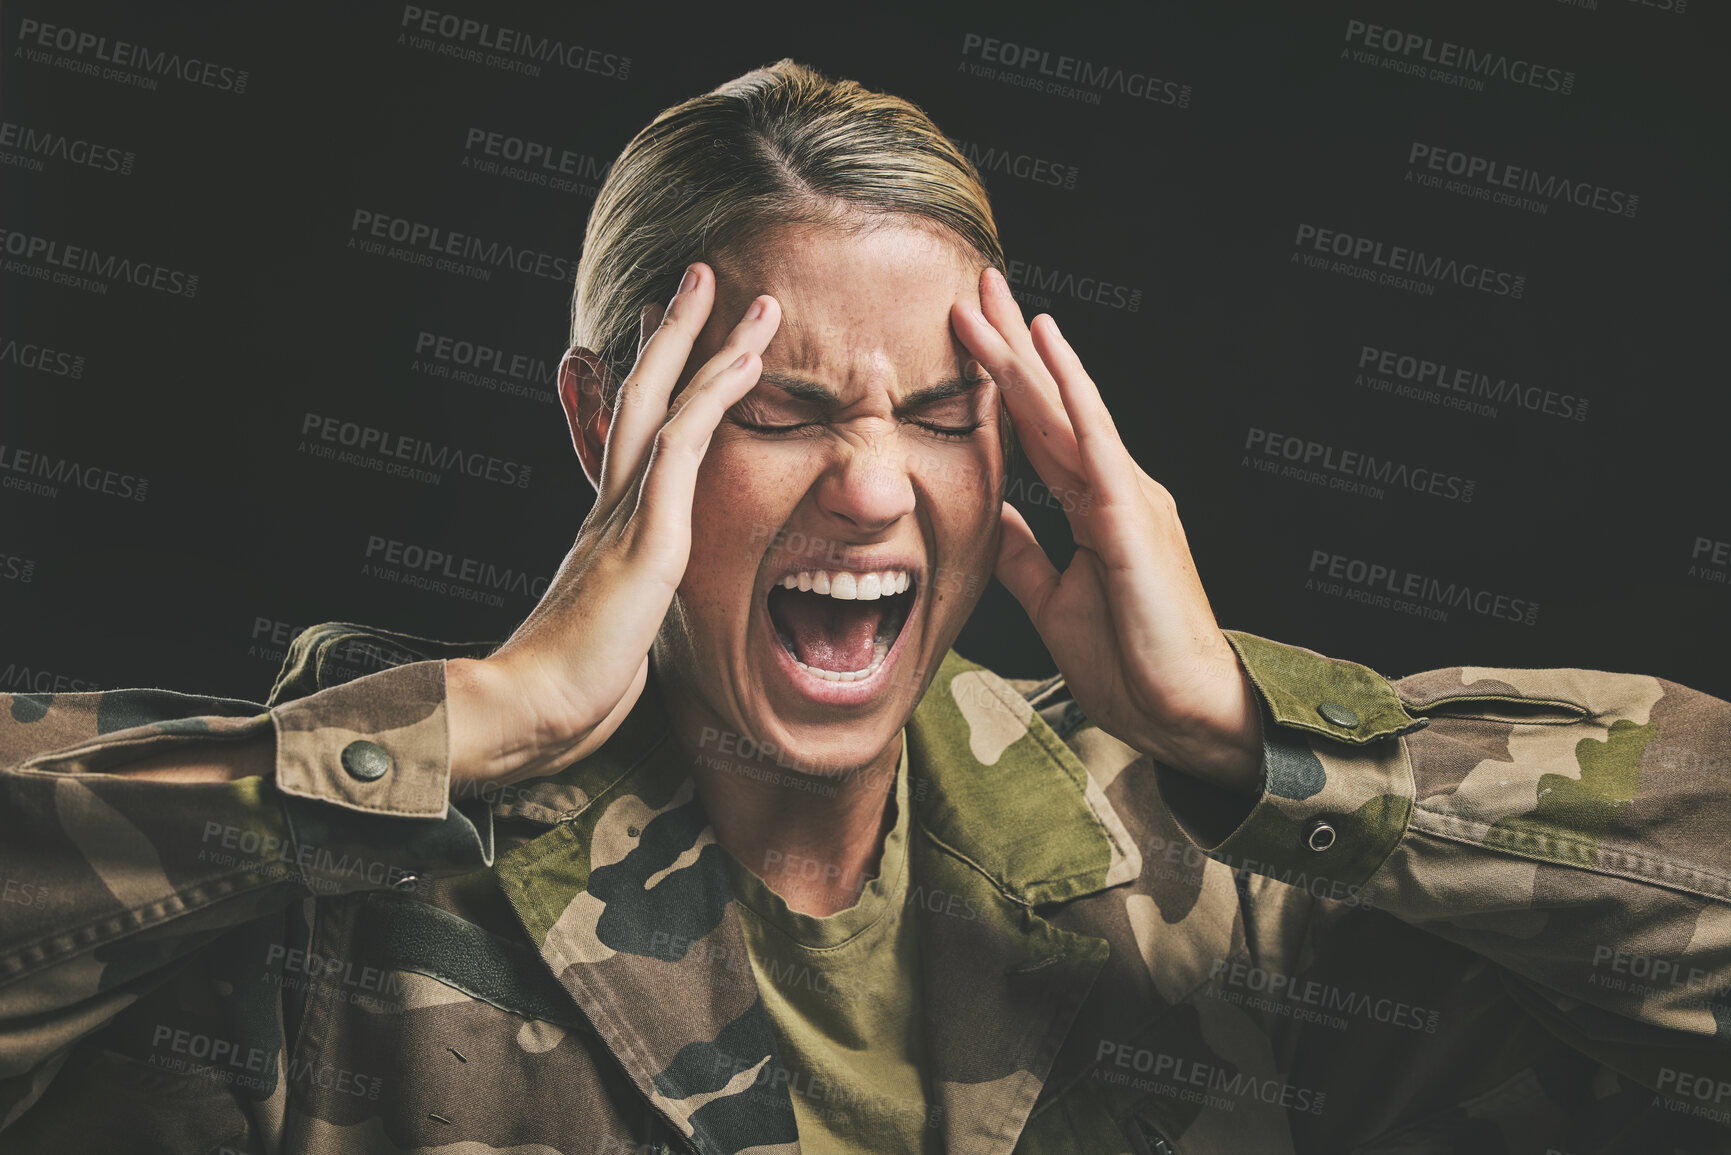 Buy stock photo Ptsd, war and mental health with woman soldier suffering from trauma and flashback in a dark studio, stress and anxiety. Psychology, depression and military survivor experience paranoid psychosis 